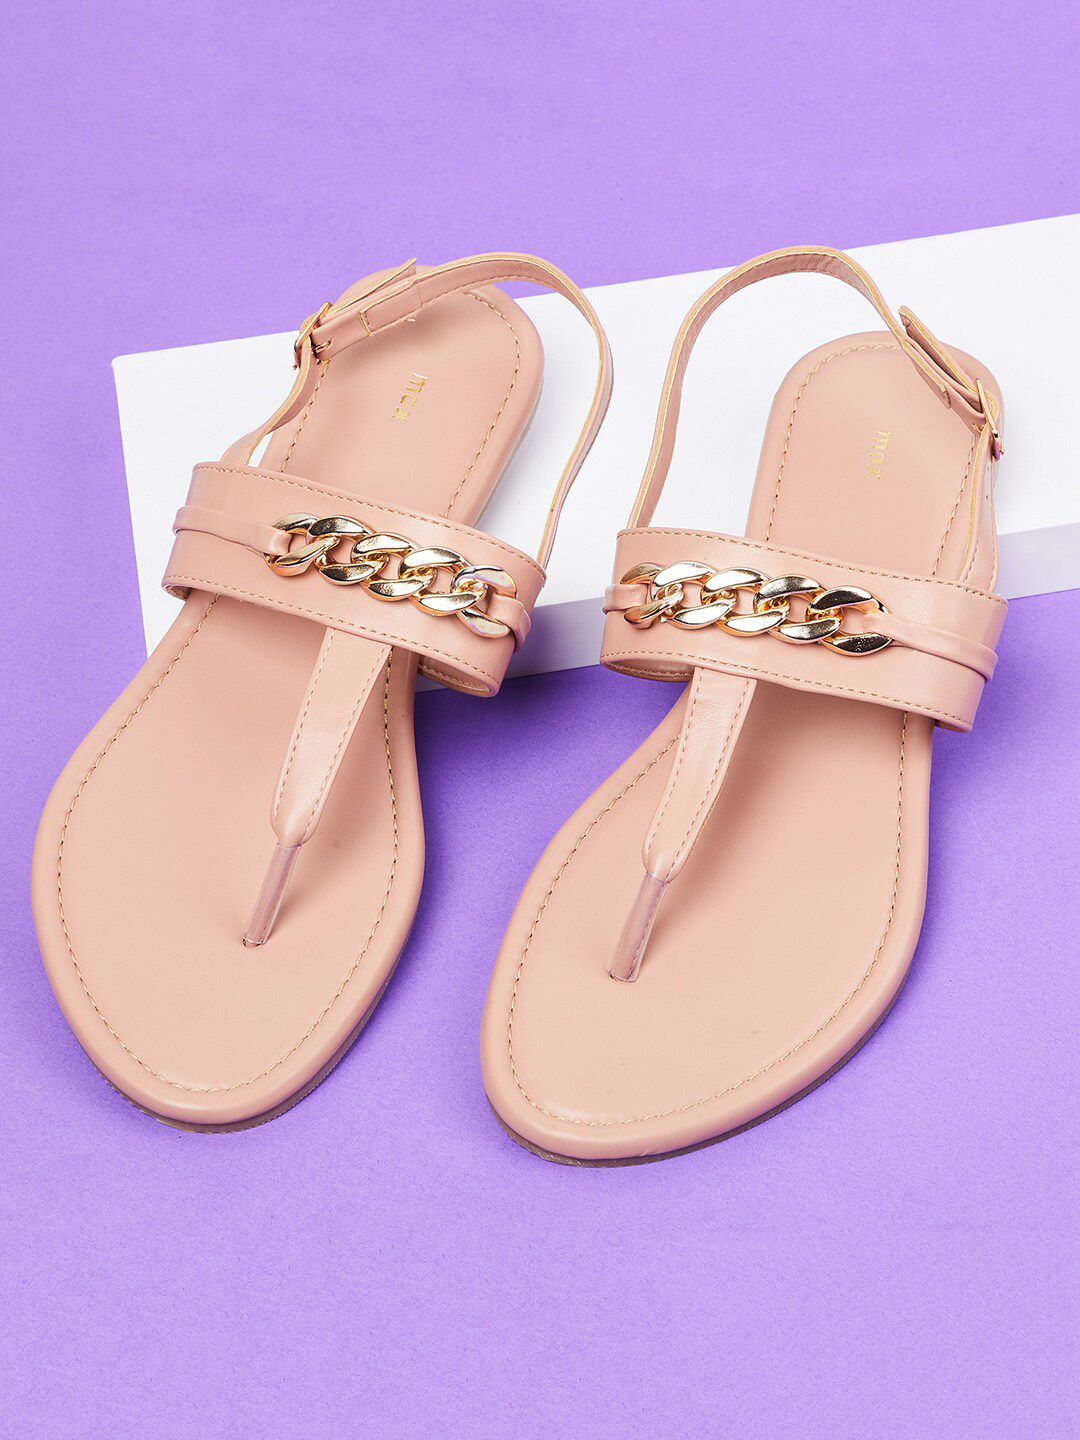 max Women Pink Embellished T-Strap Flats Price in India